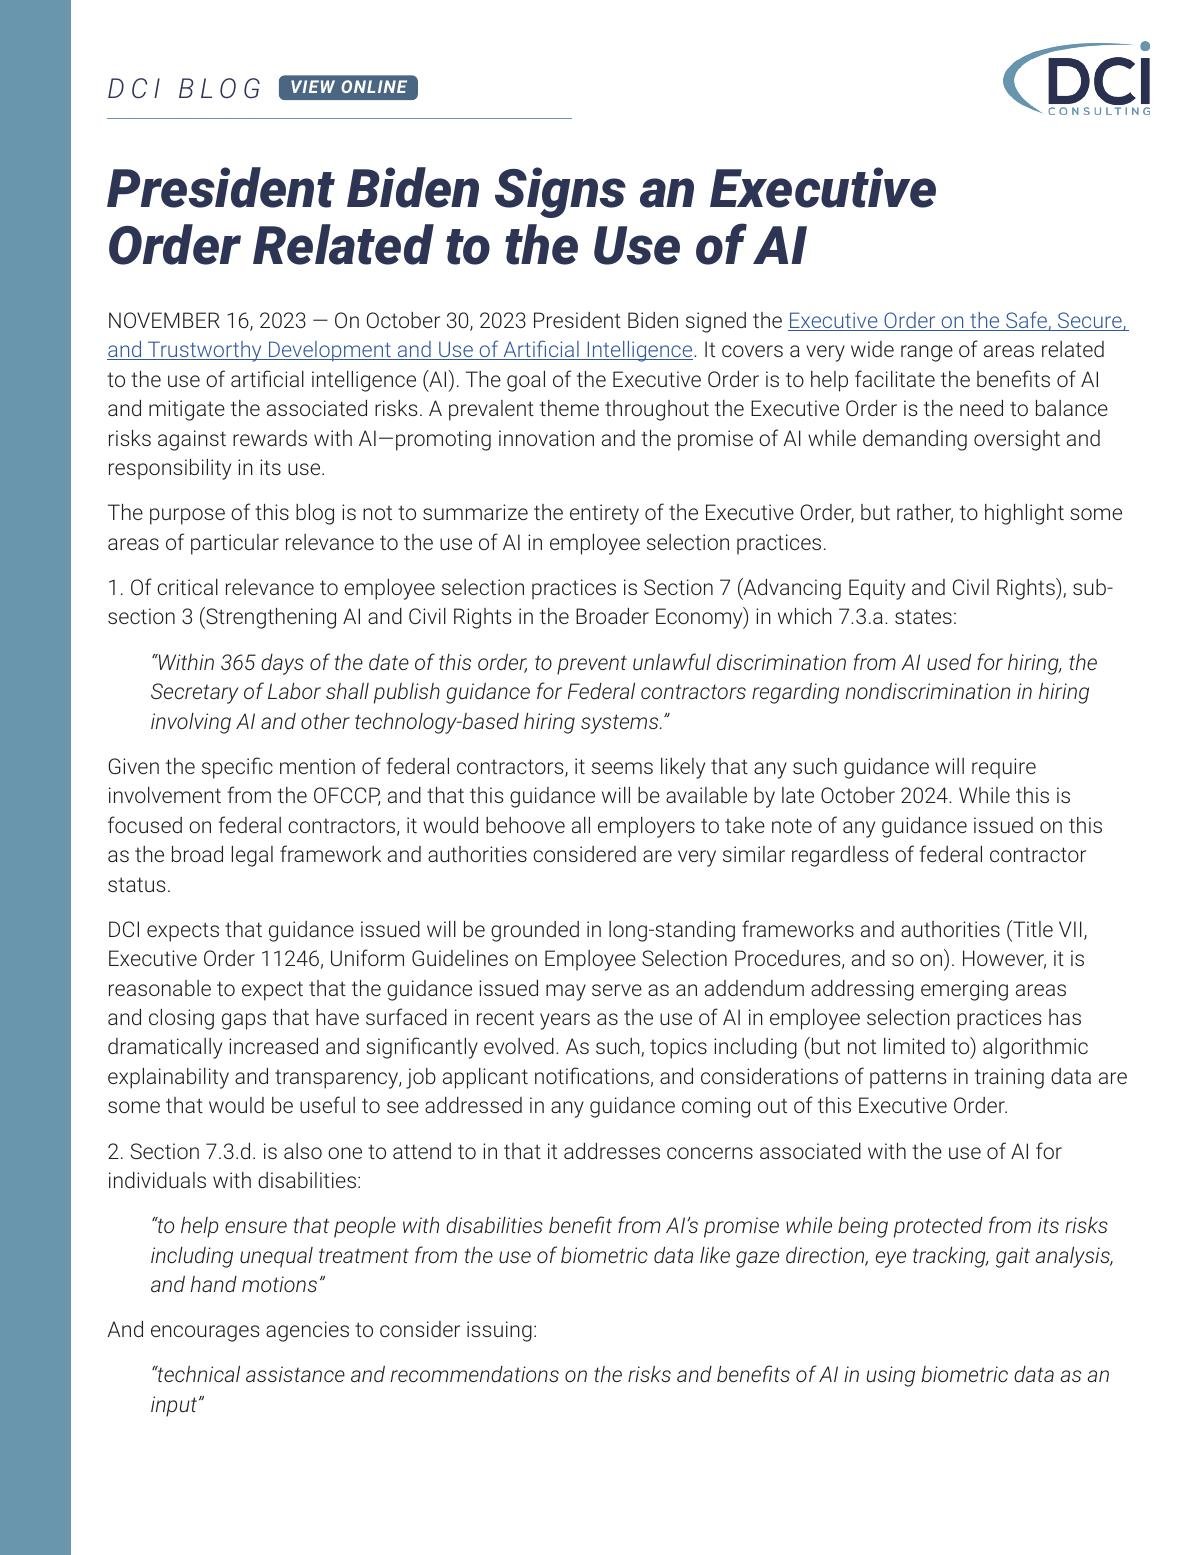 President Biden Signs an Executive Order Related to the Use of AI